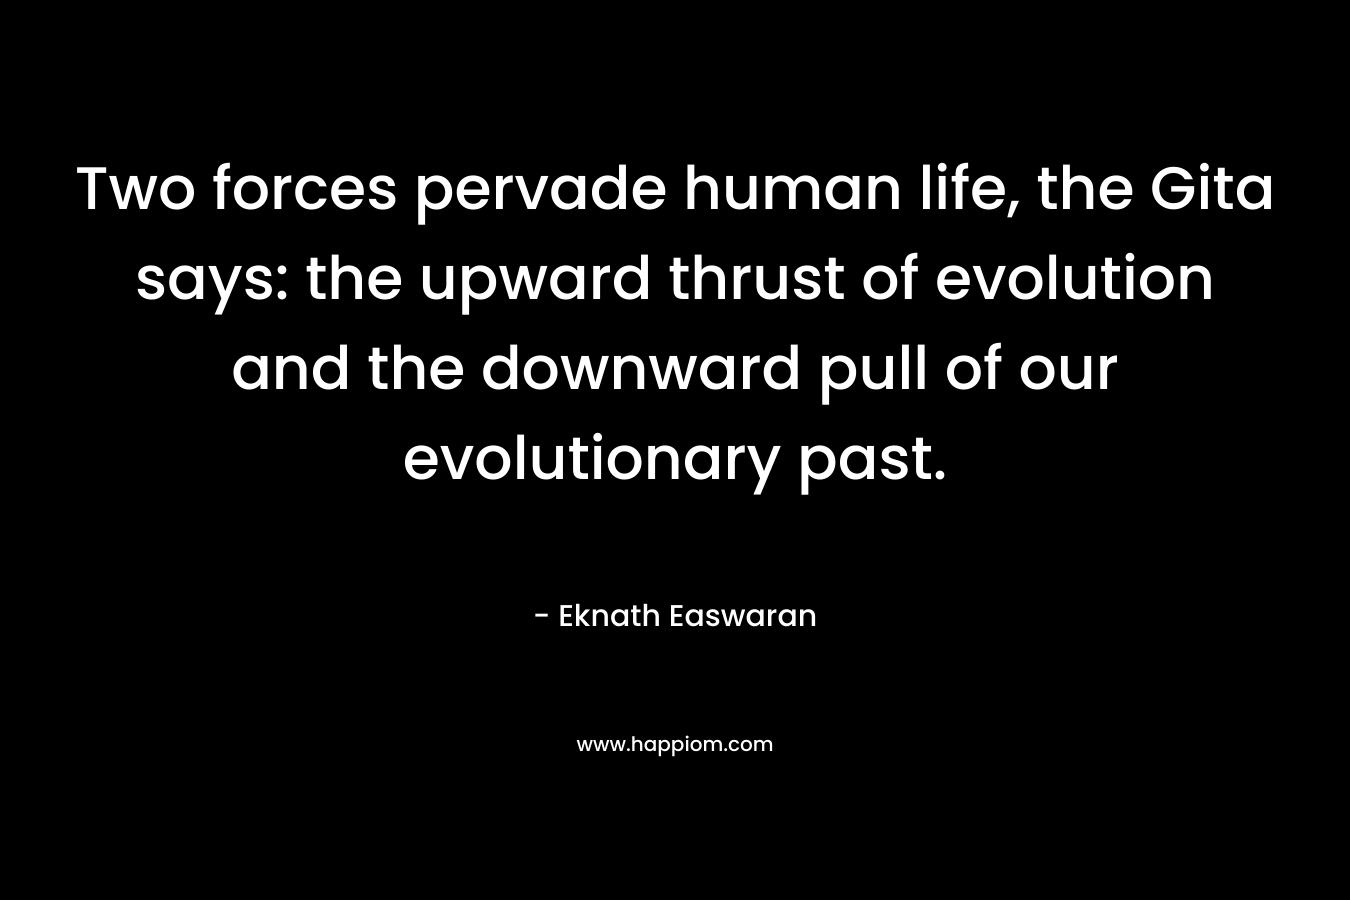 Two forces pervade human life, the Gita says: the upward thrust of evolution and the downward pull of our evolutionary past.